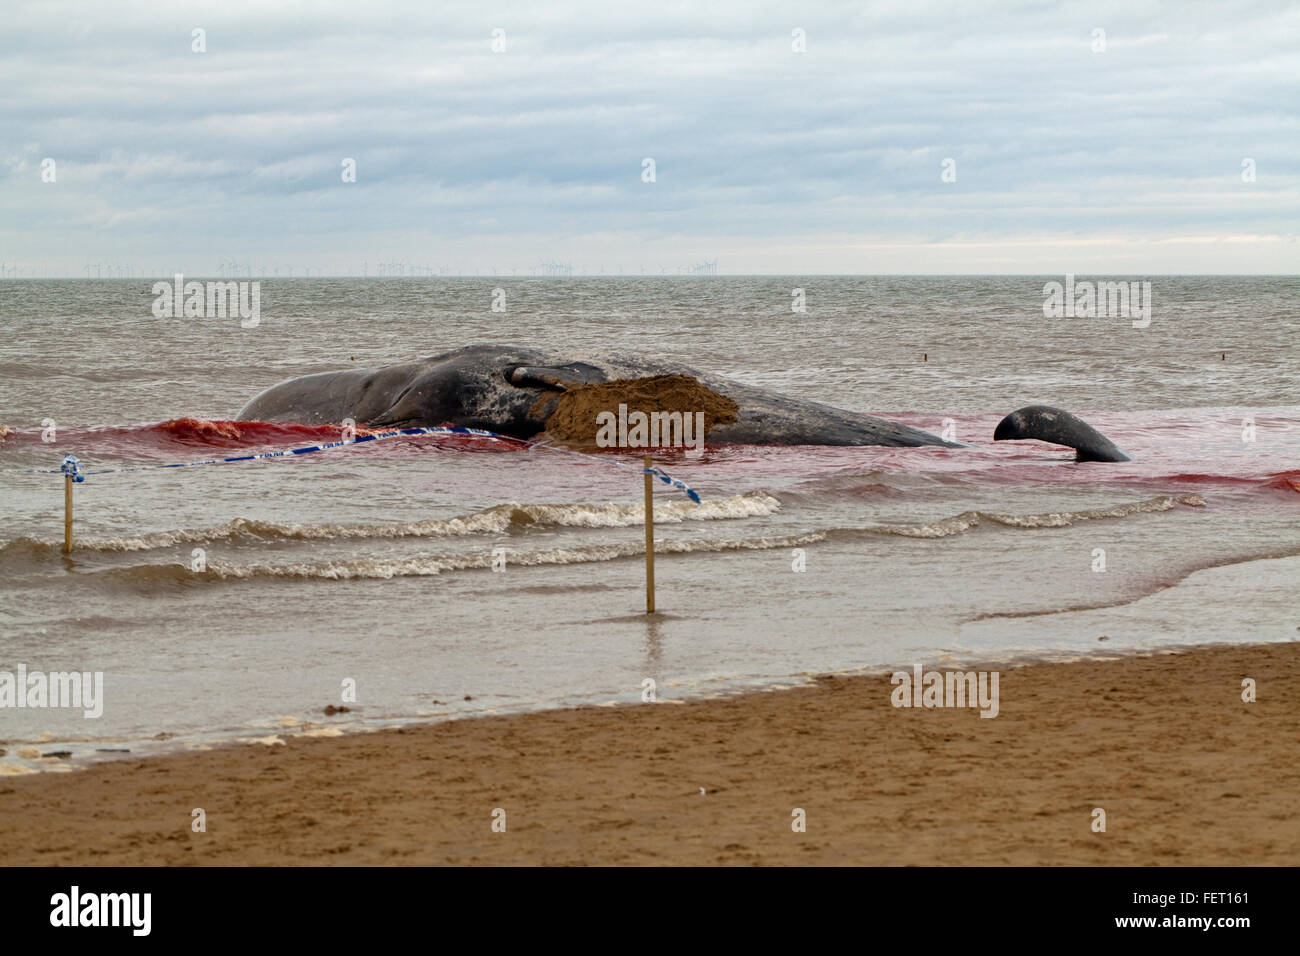 Sperm Whale (Physeter macrocephalus) . Body of a 14 meter long beached animal, Hunstanton, north Norfolk, UK. 5th February 2016. Stock Photo